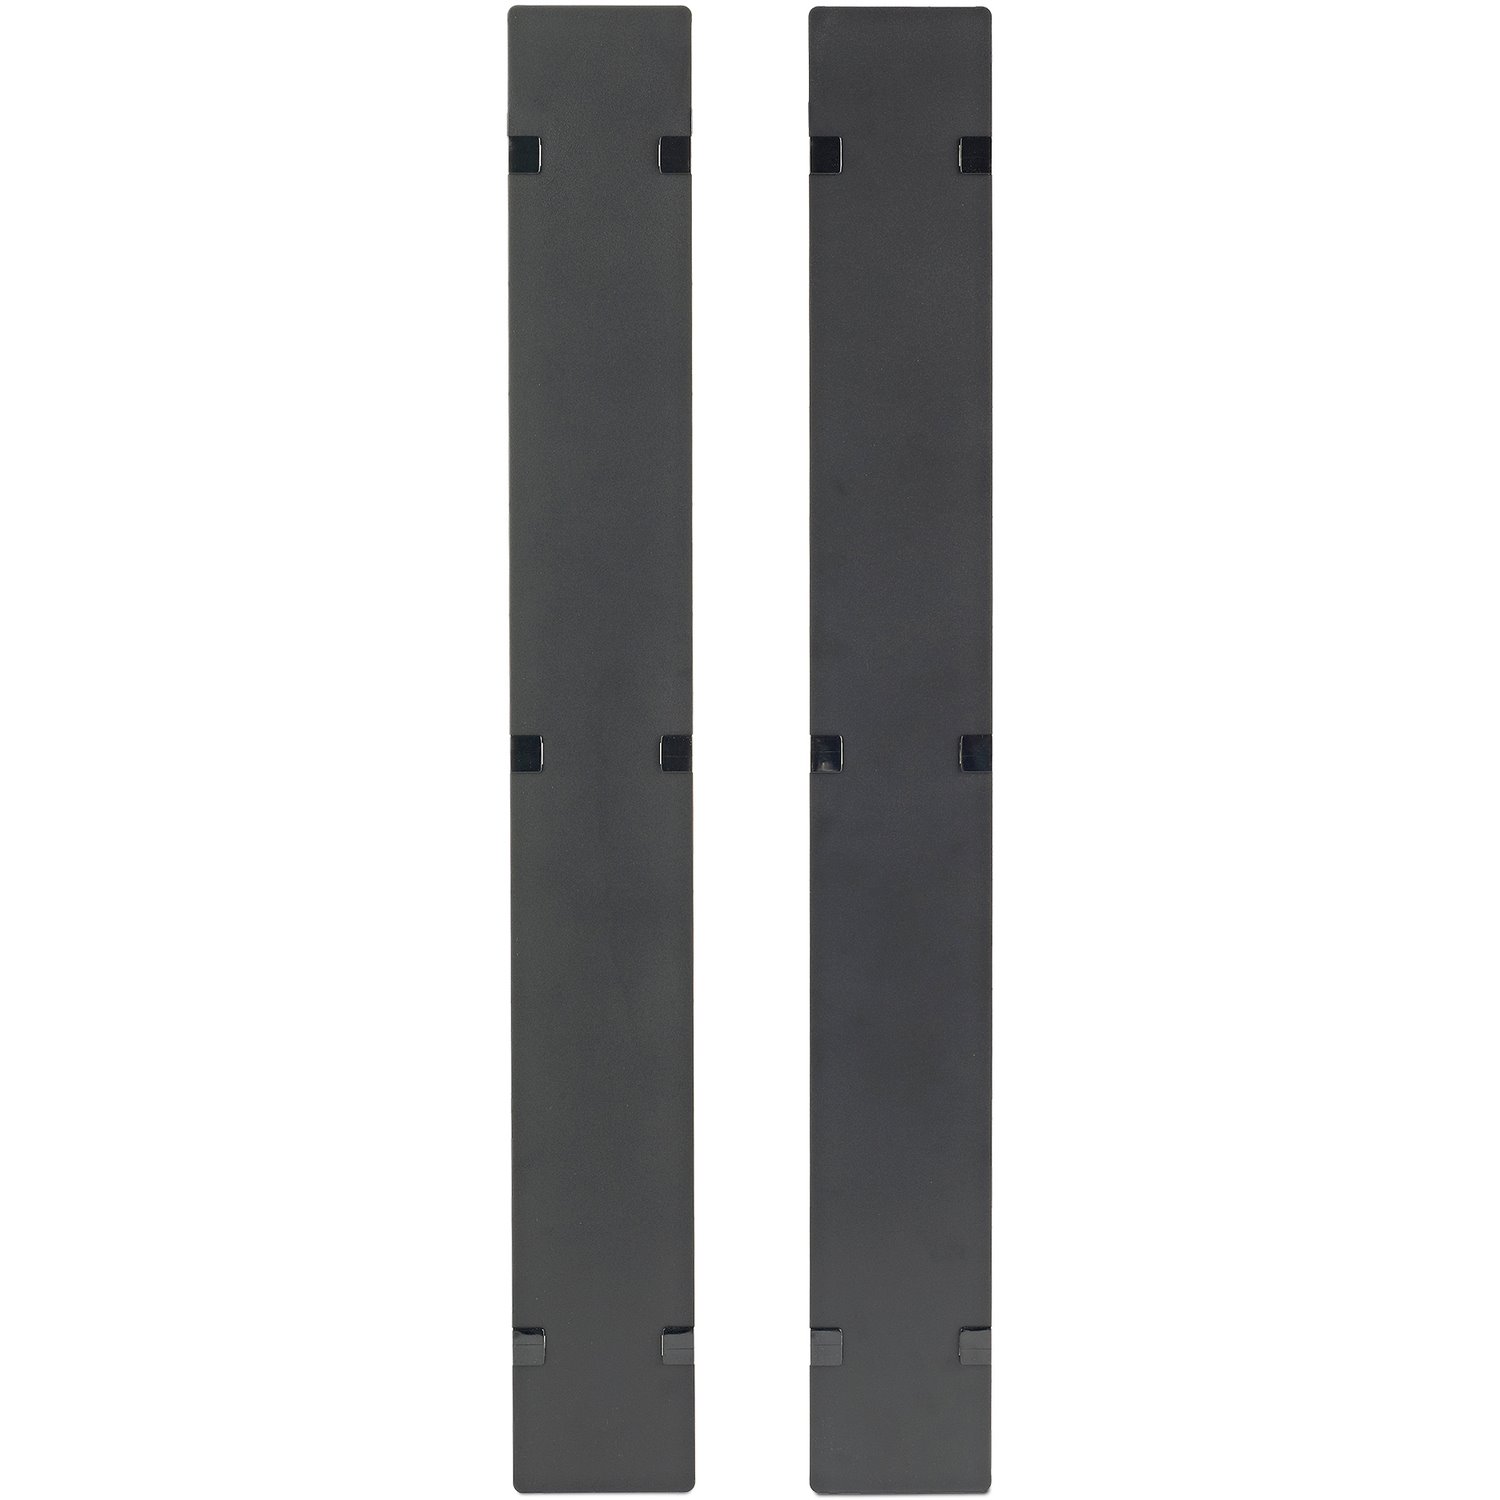 APC by Schneider Electric Hinged Covers for NetShelter SX 750mm Wide 42U Vertical Cable Manager (Qty 2)